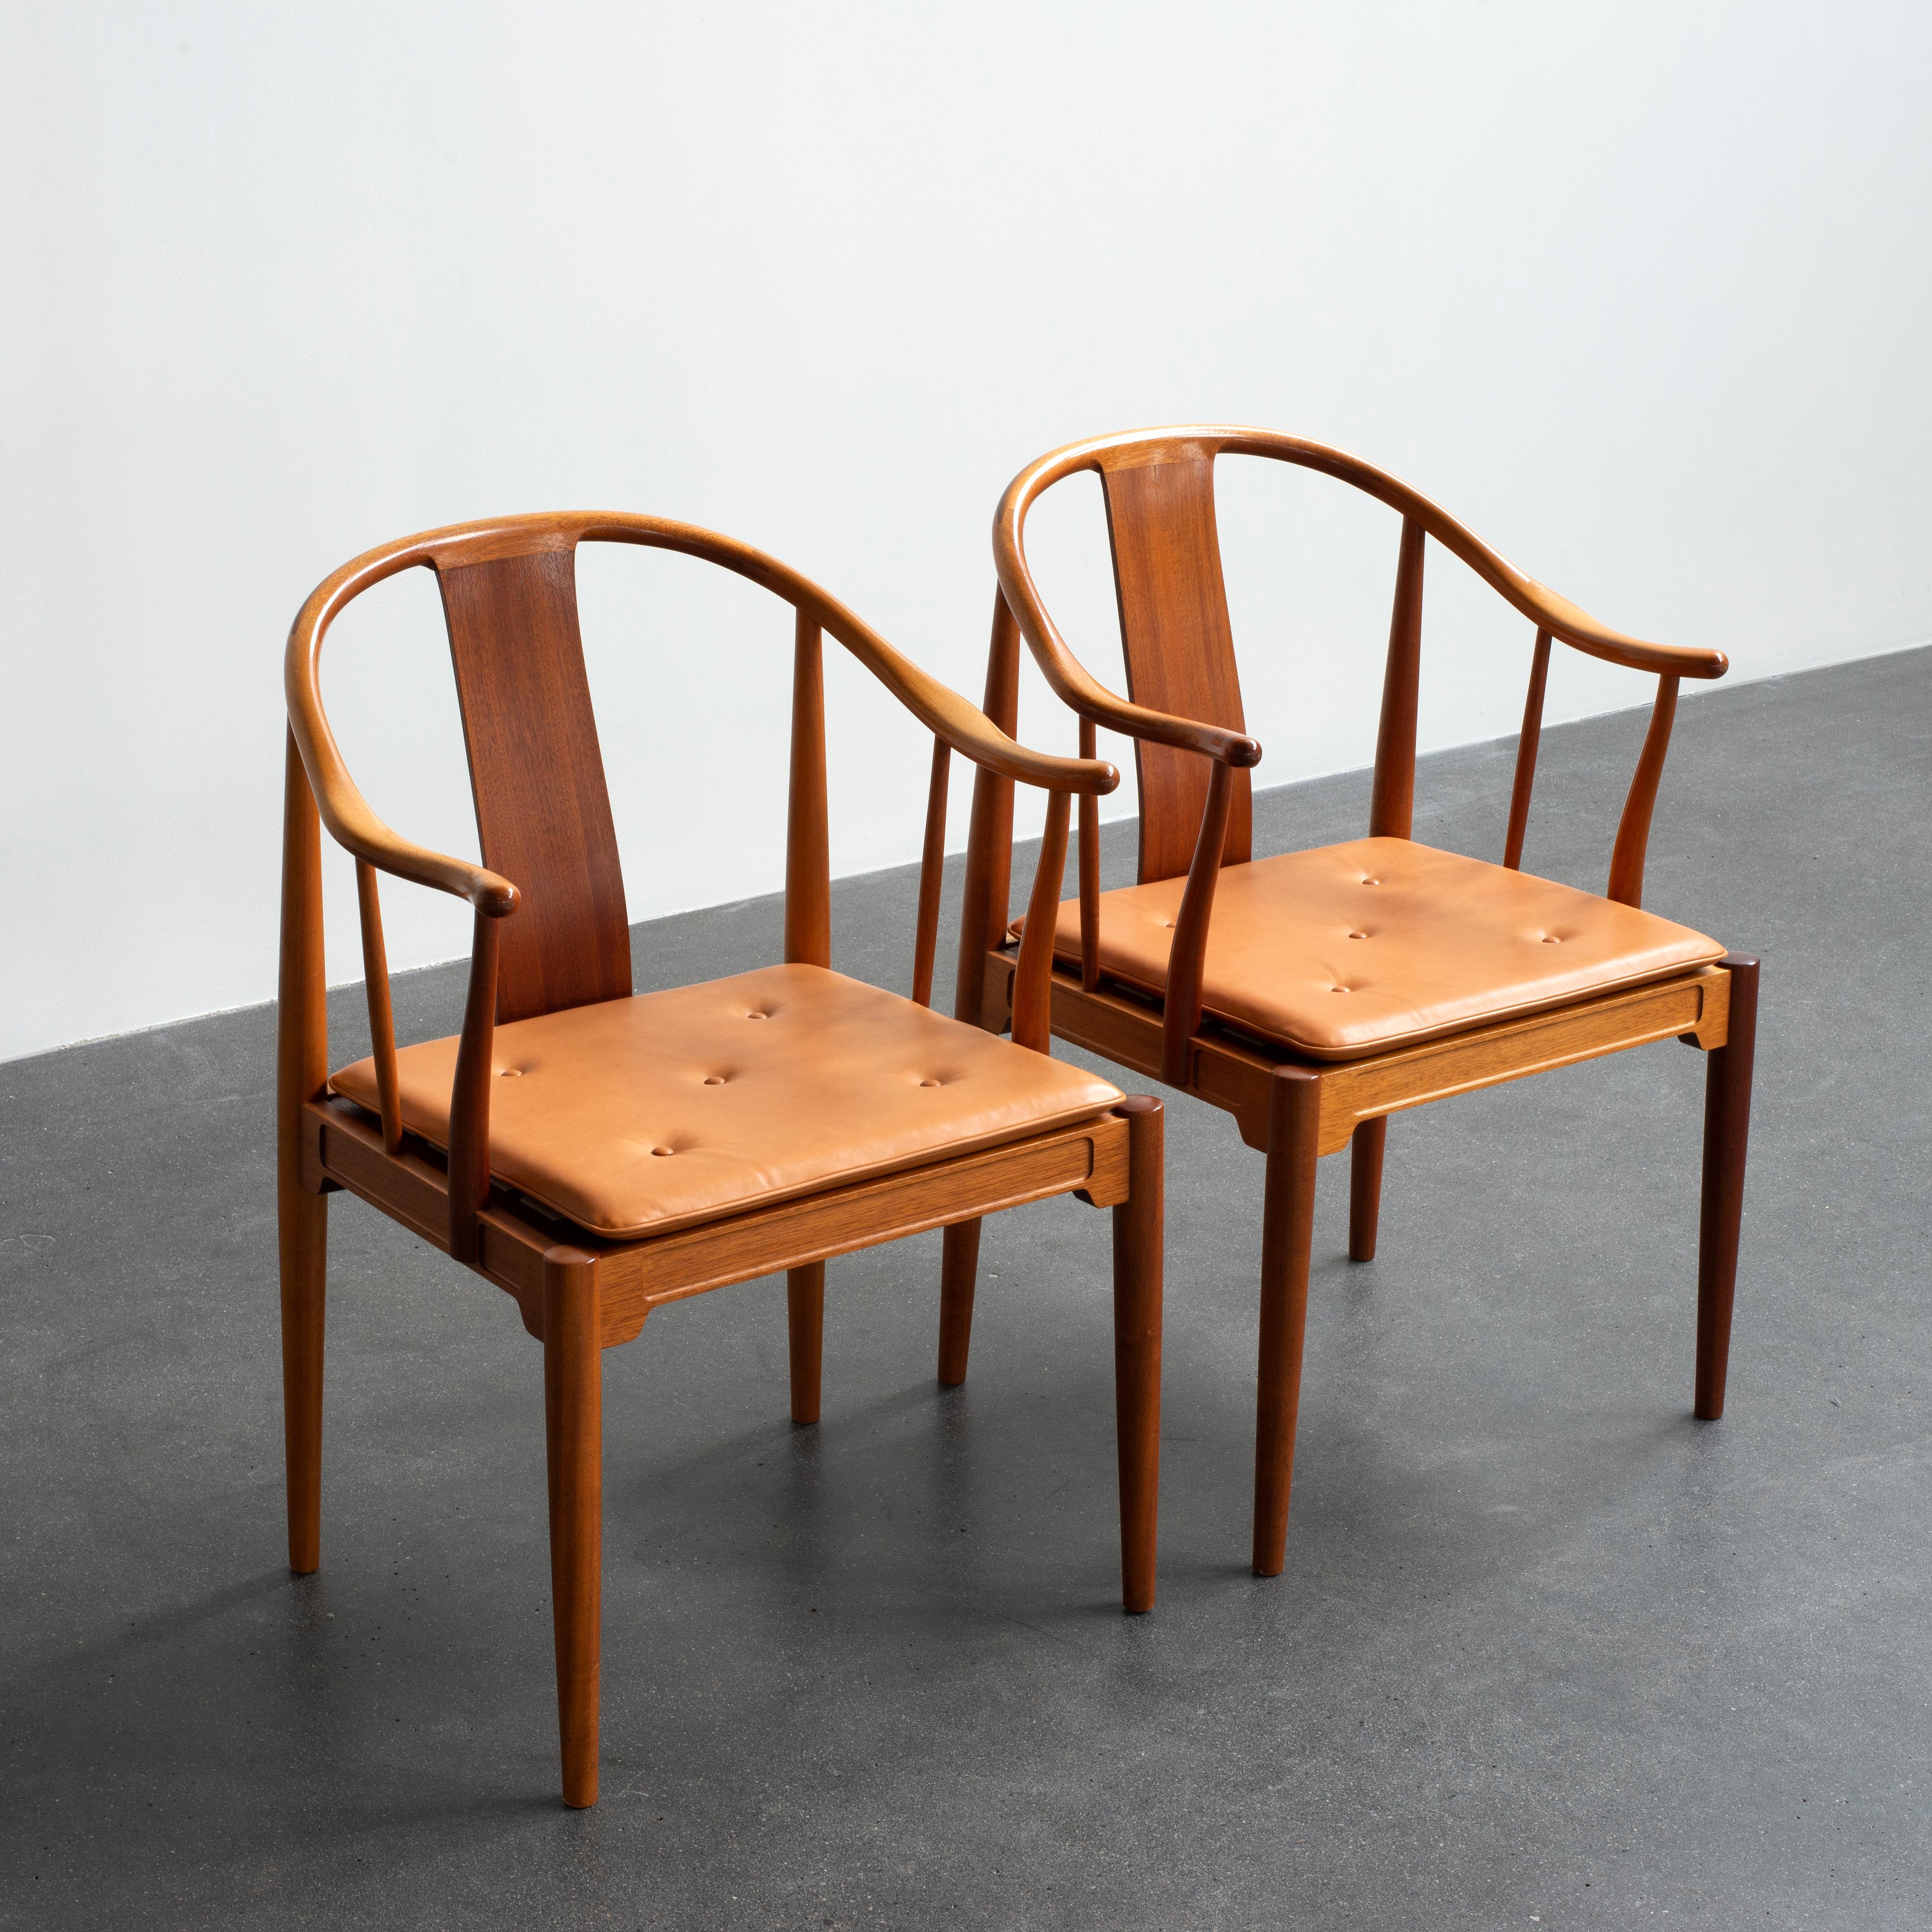 Lacquered Hans J. Wegner Pair of Chinese Chairs in Mahogany for Fritz Hansen